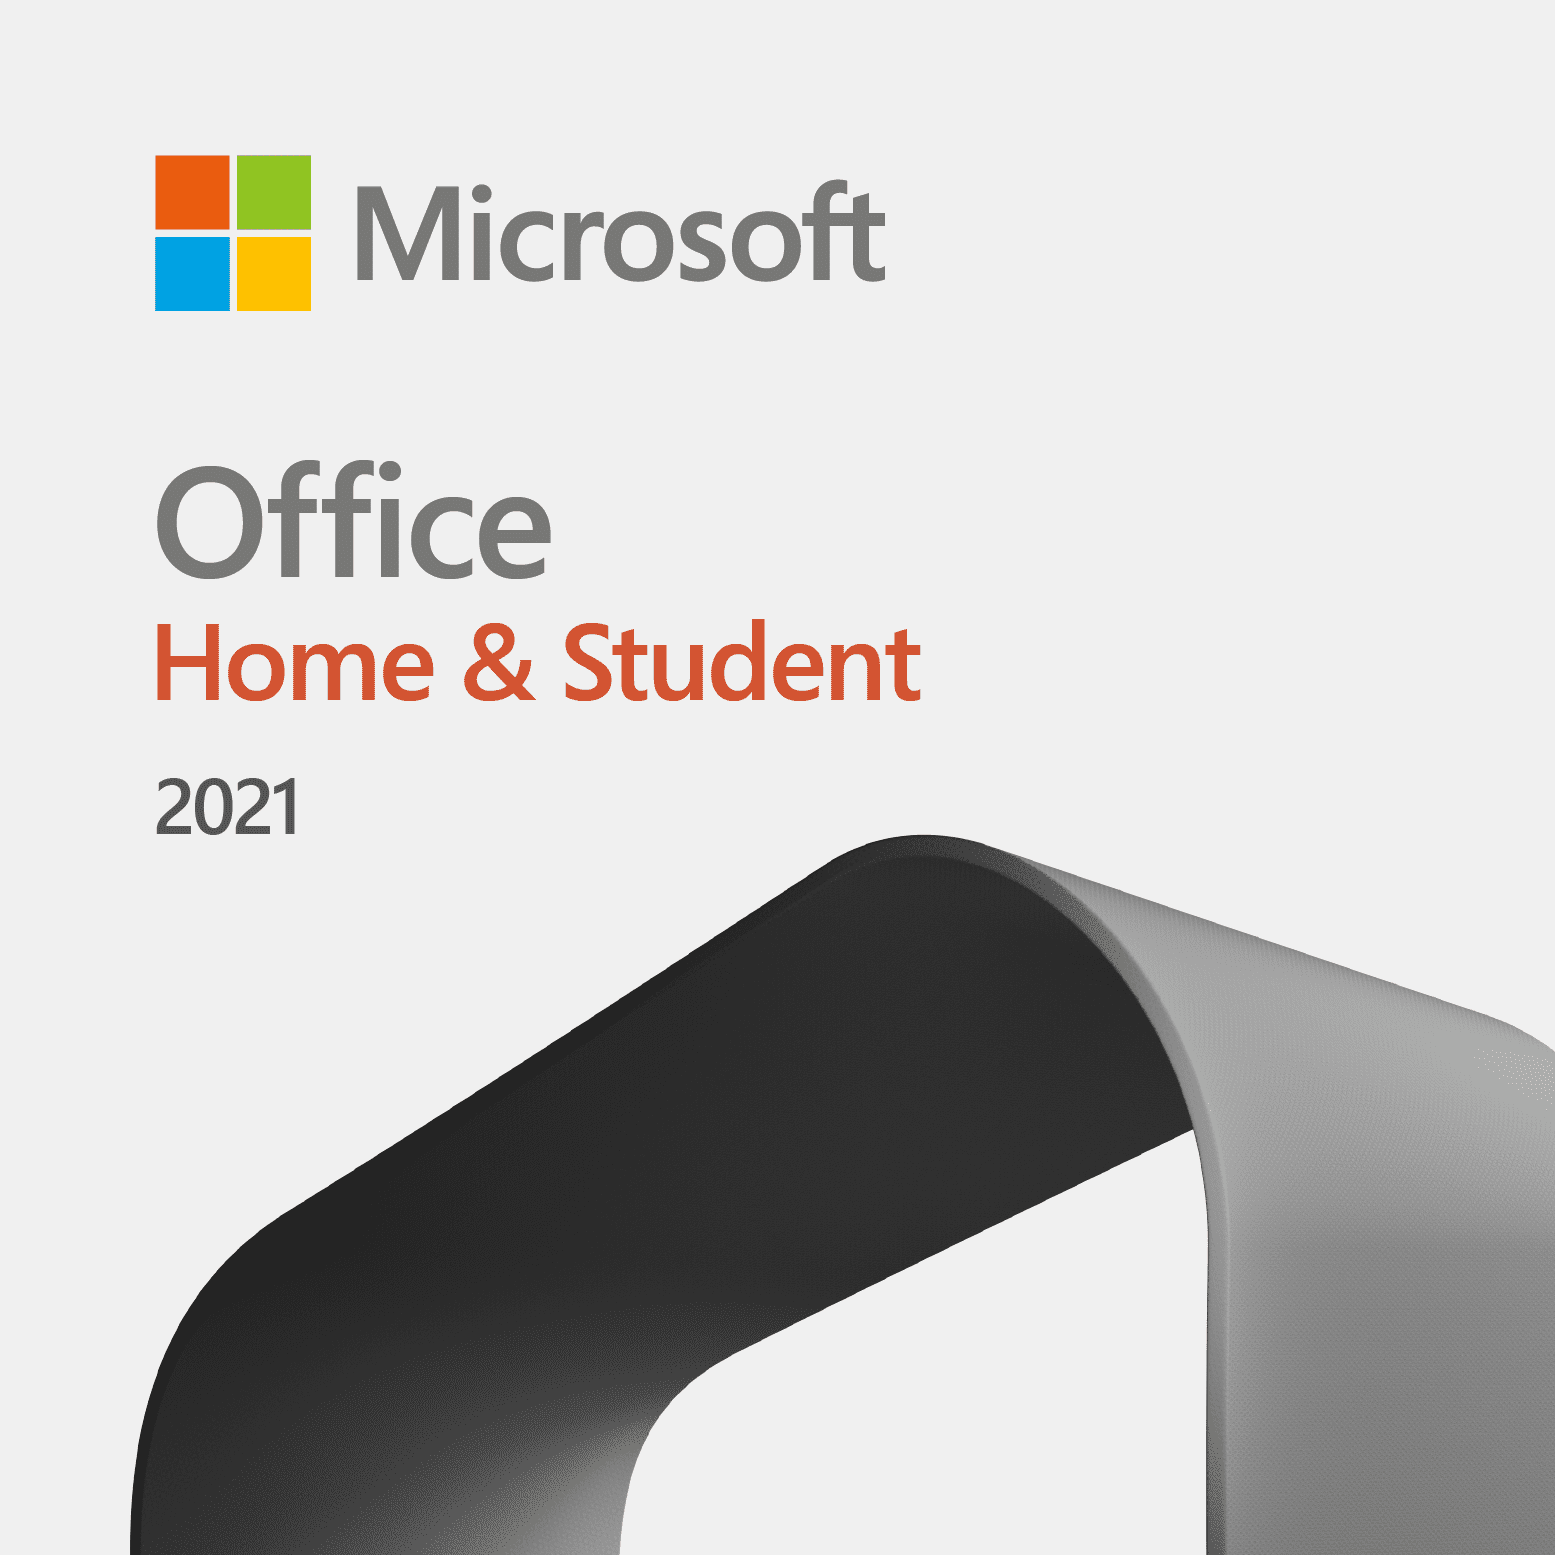 Microsoft Office Home & Student 2021, One-time purchase for 1 PC 